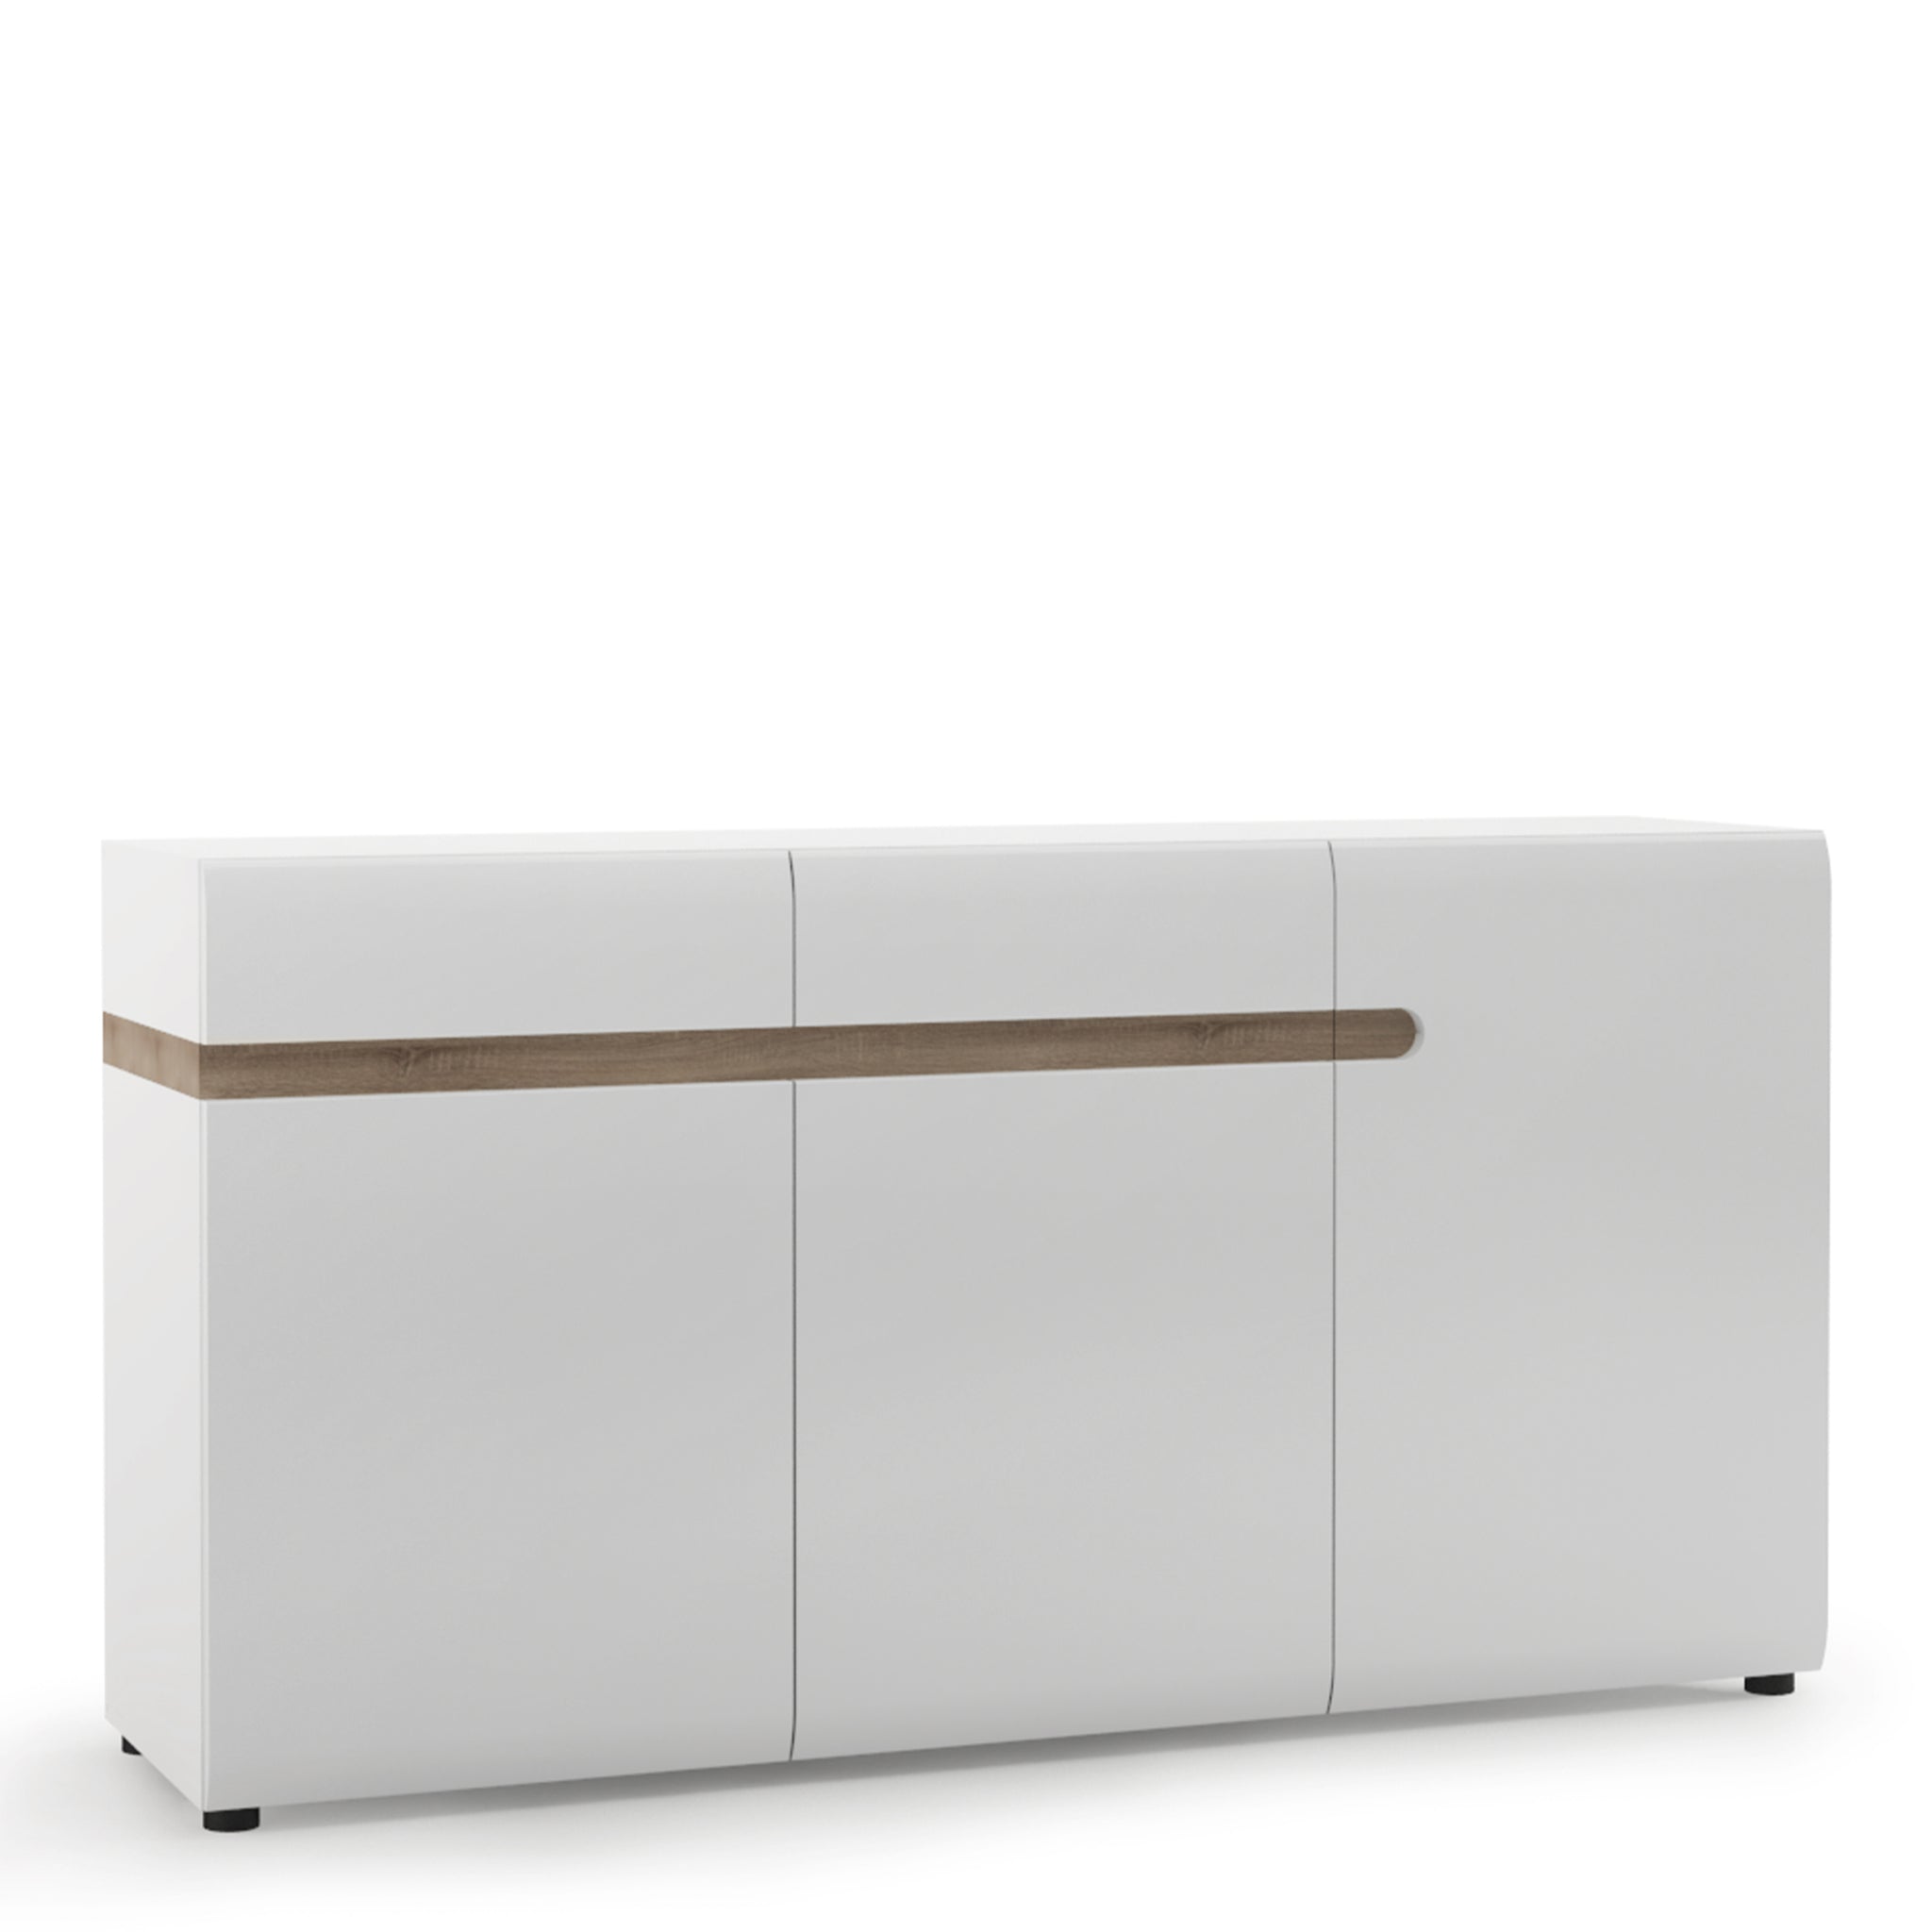 Notting hill 2 Drawer 3 door sideboard in White with Oak Trim